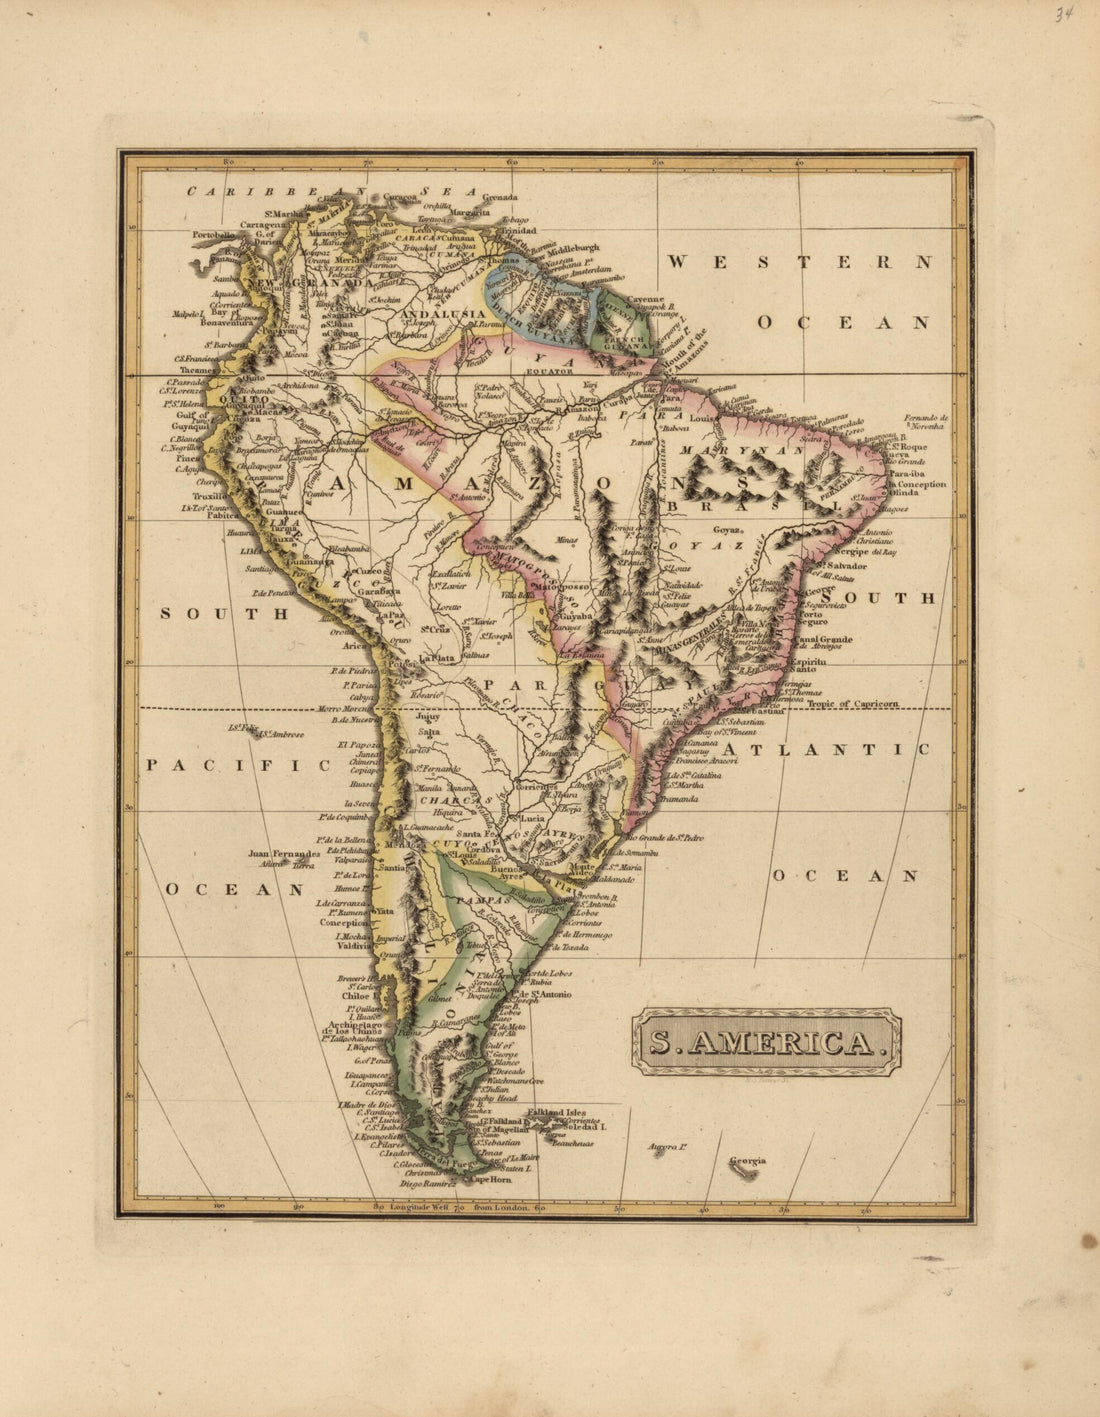 This old map of South America from a New and Elegant General Atlas, Containing Maps of Each of the United States  from 1817 was created by Henry Schenck Tanner in 1817